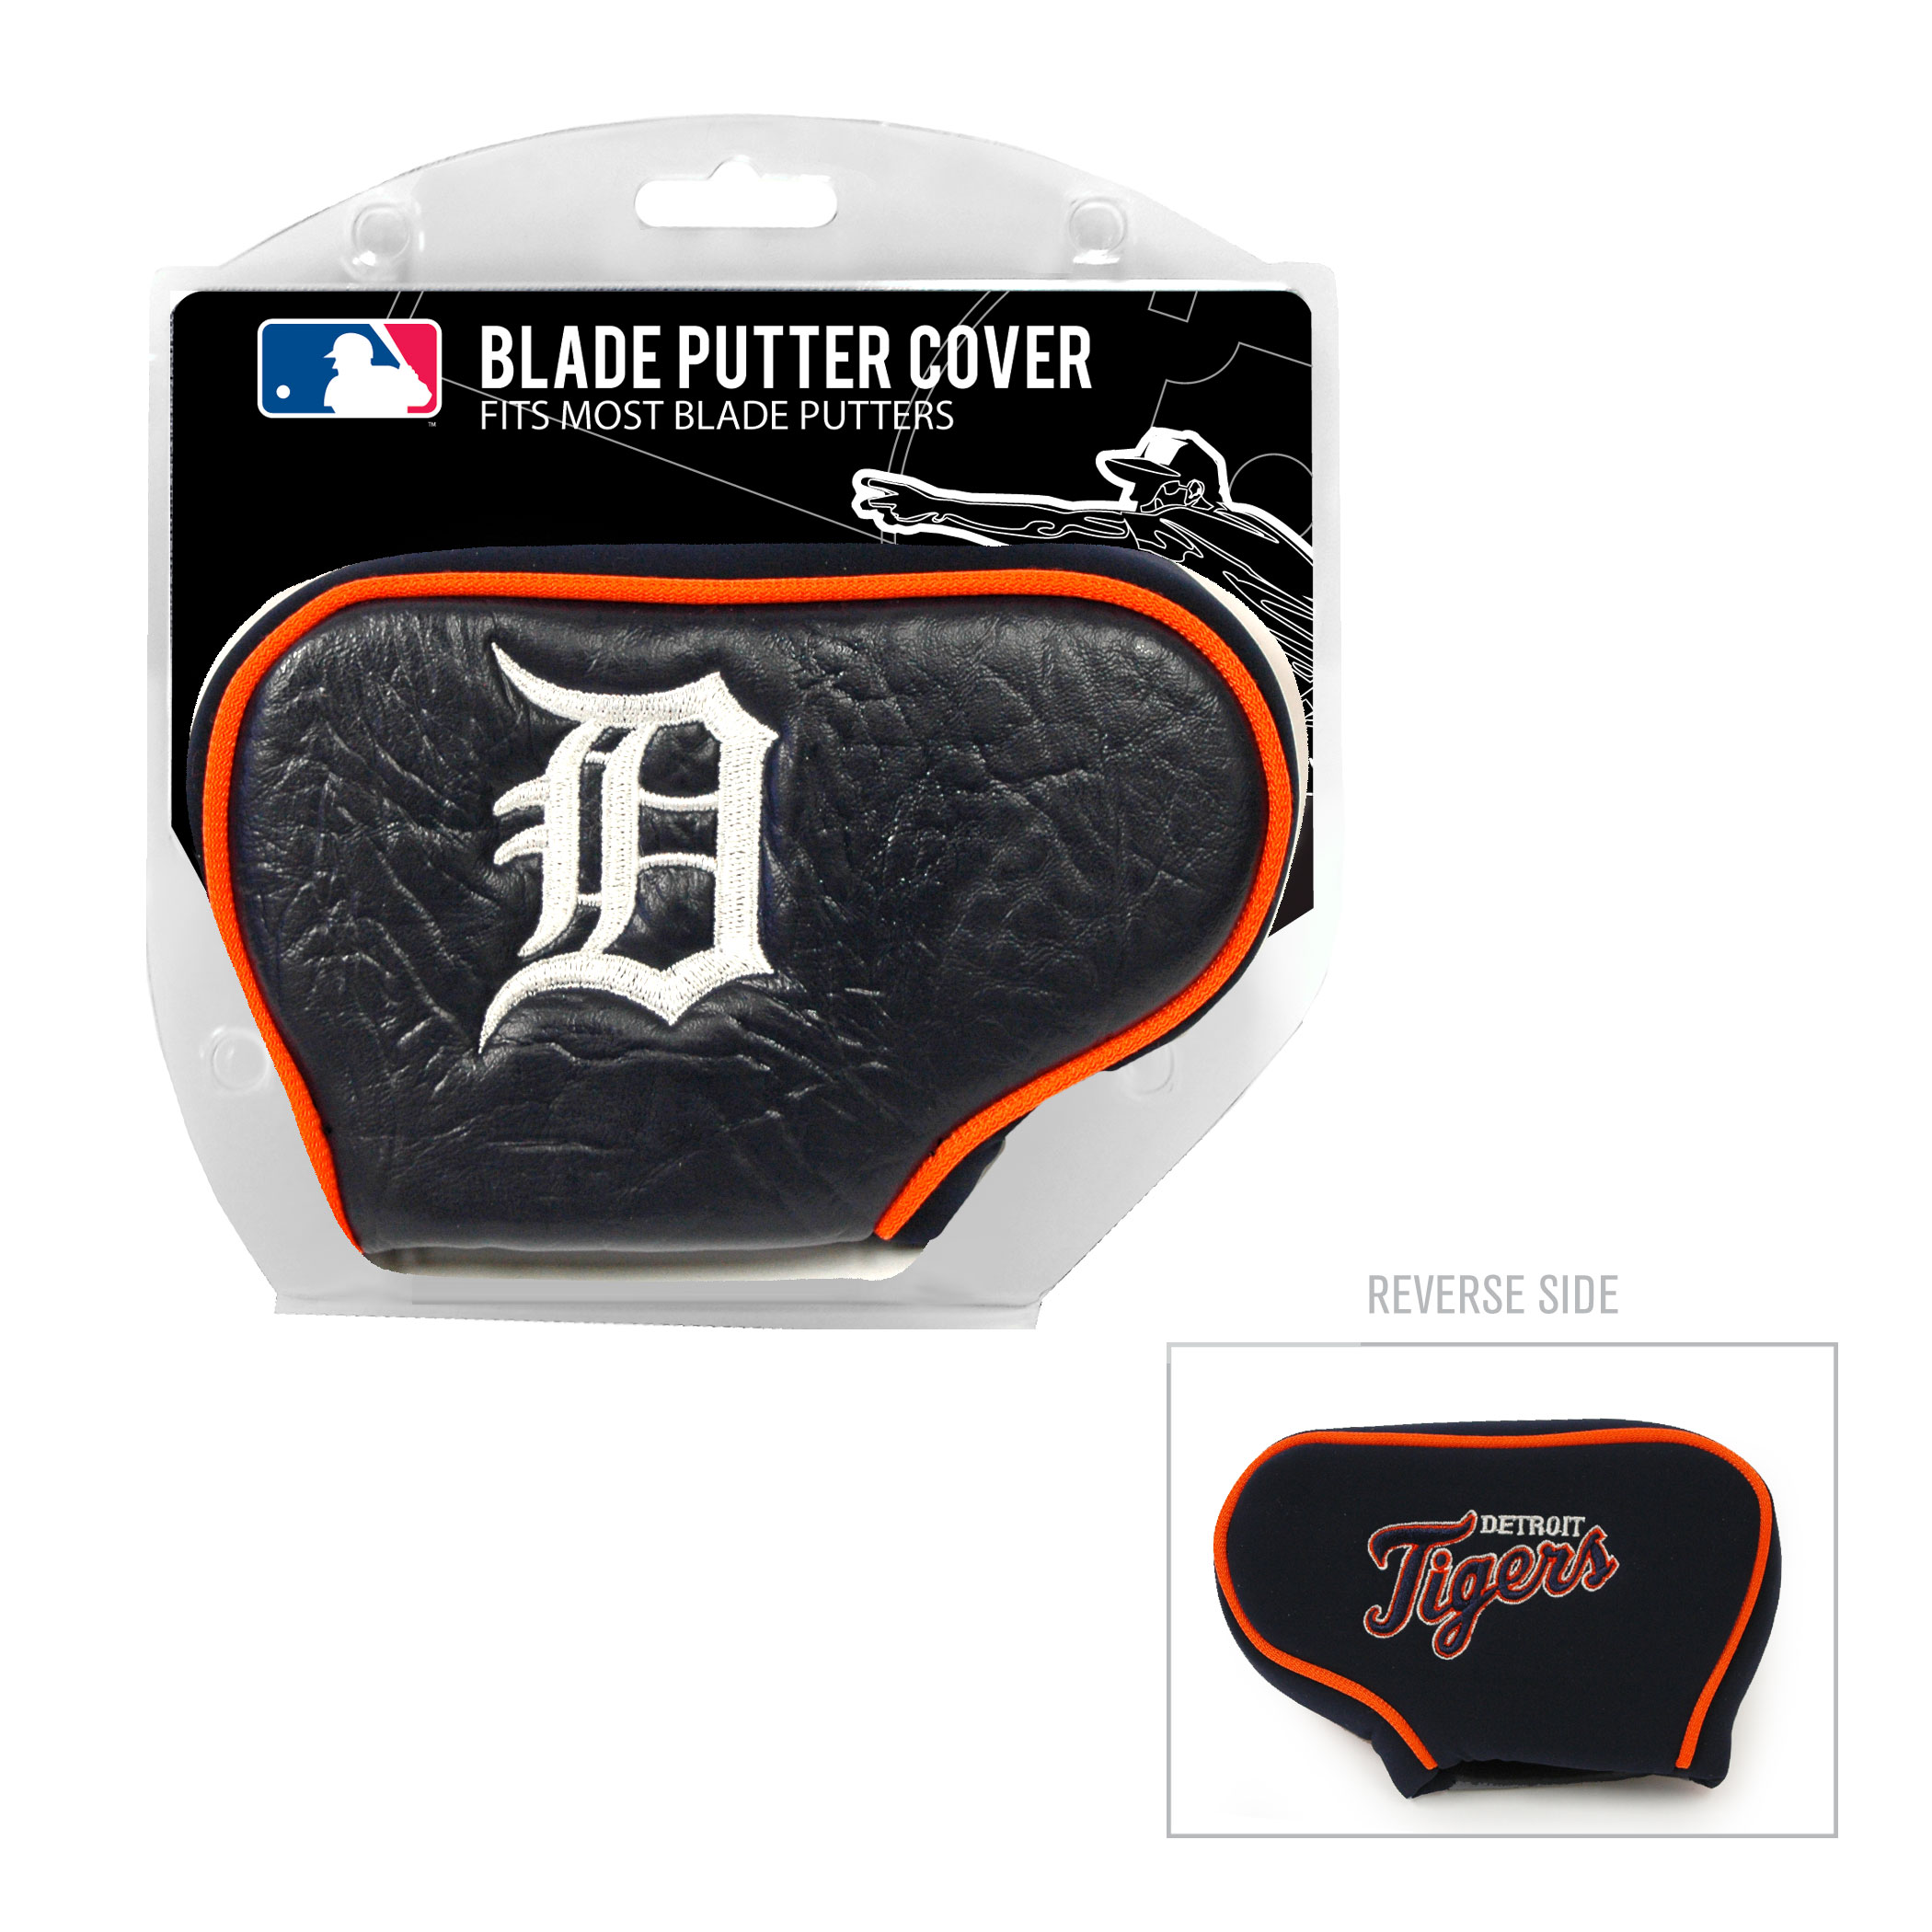 Detroit Tigers Blade Putter Cover